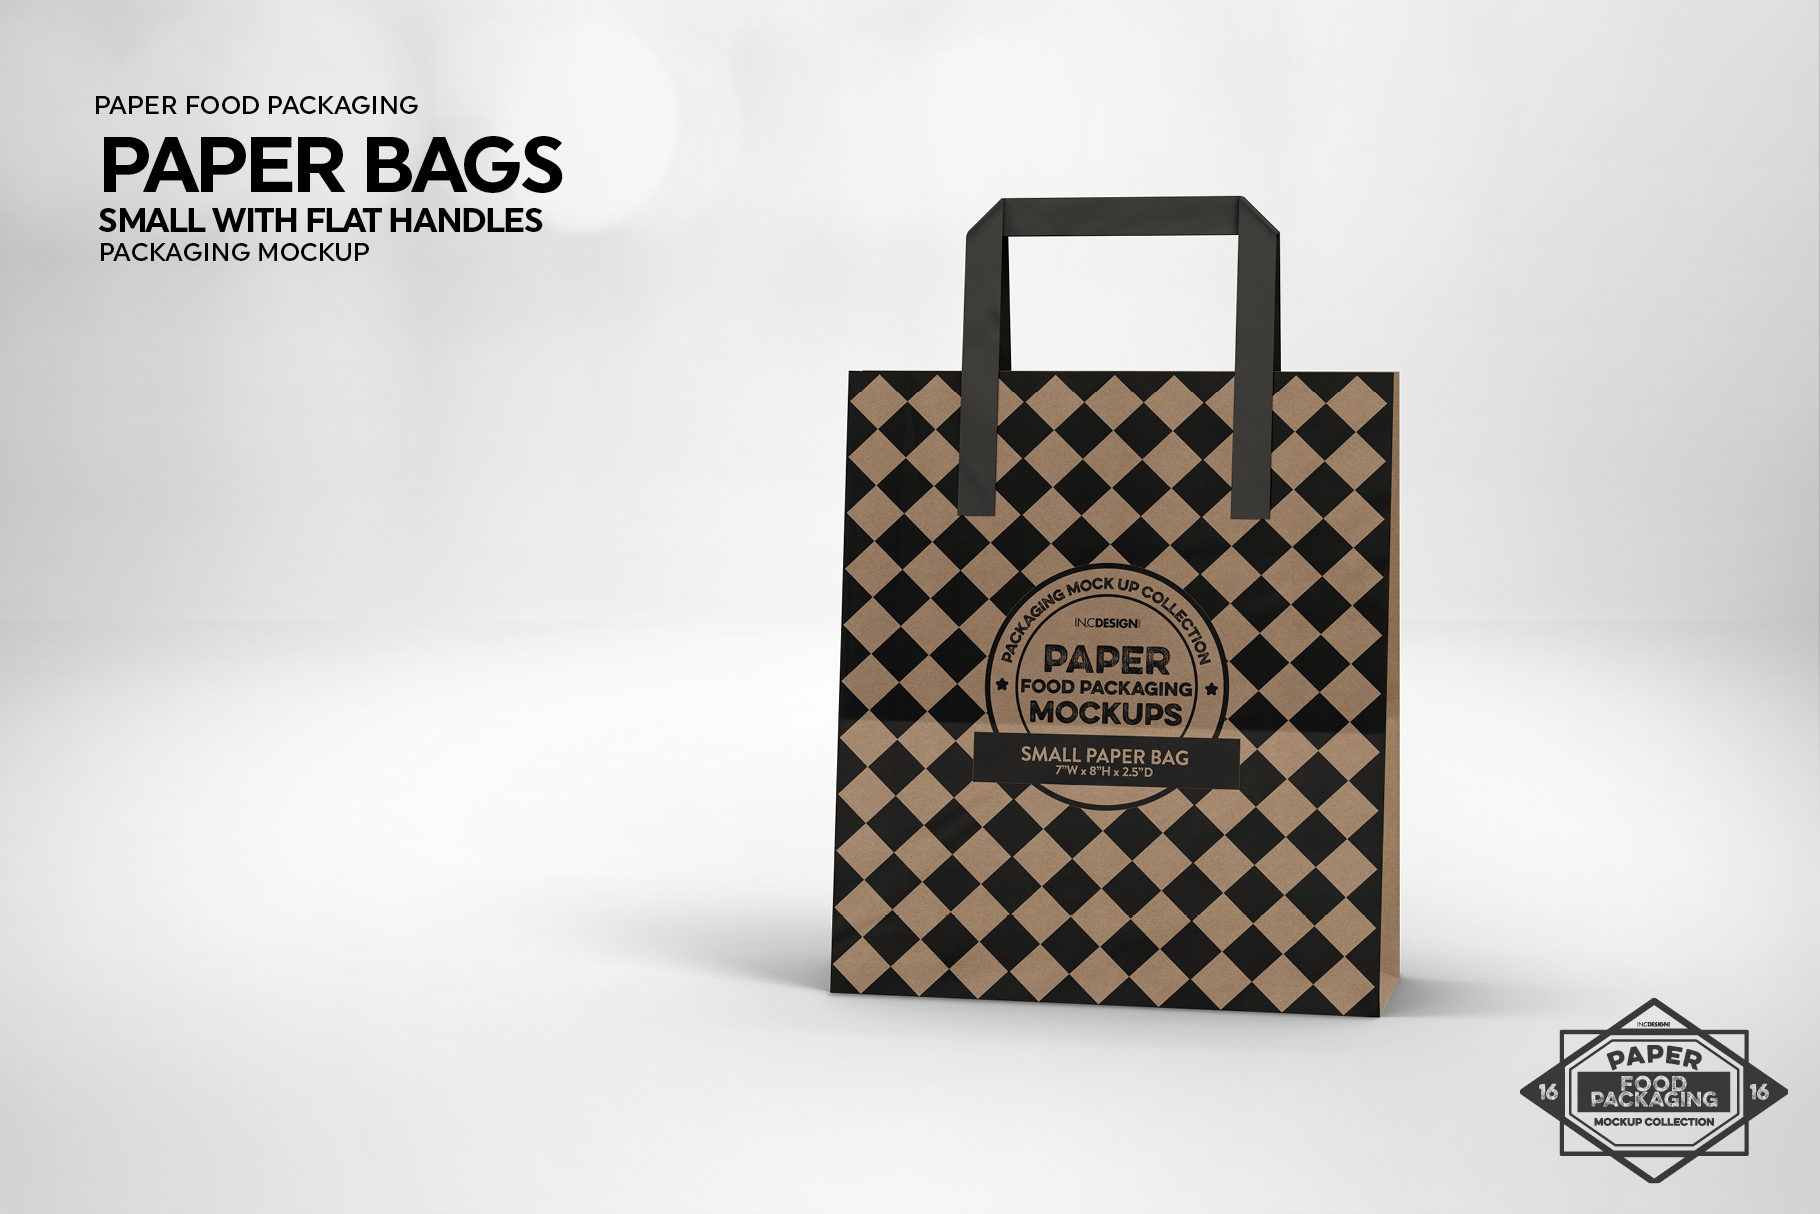 SMALL Paper Bag with Flat Handles Packaging MockUp (284101 ...